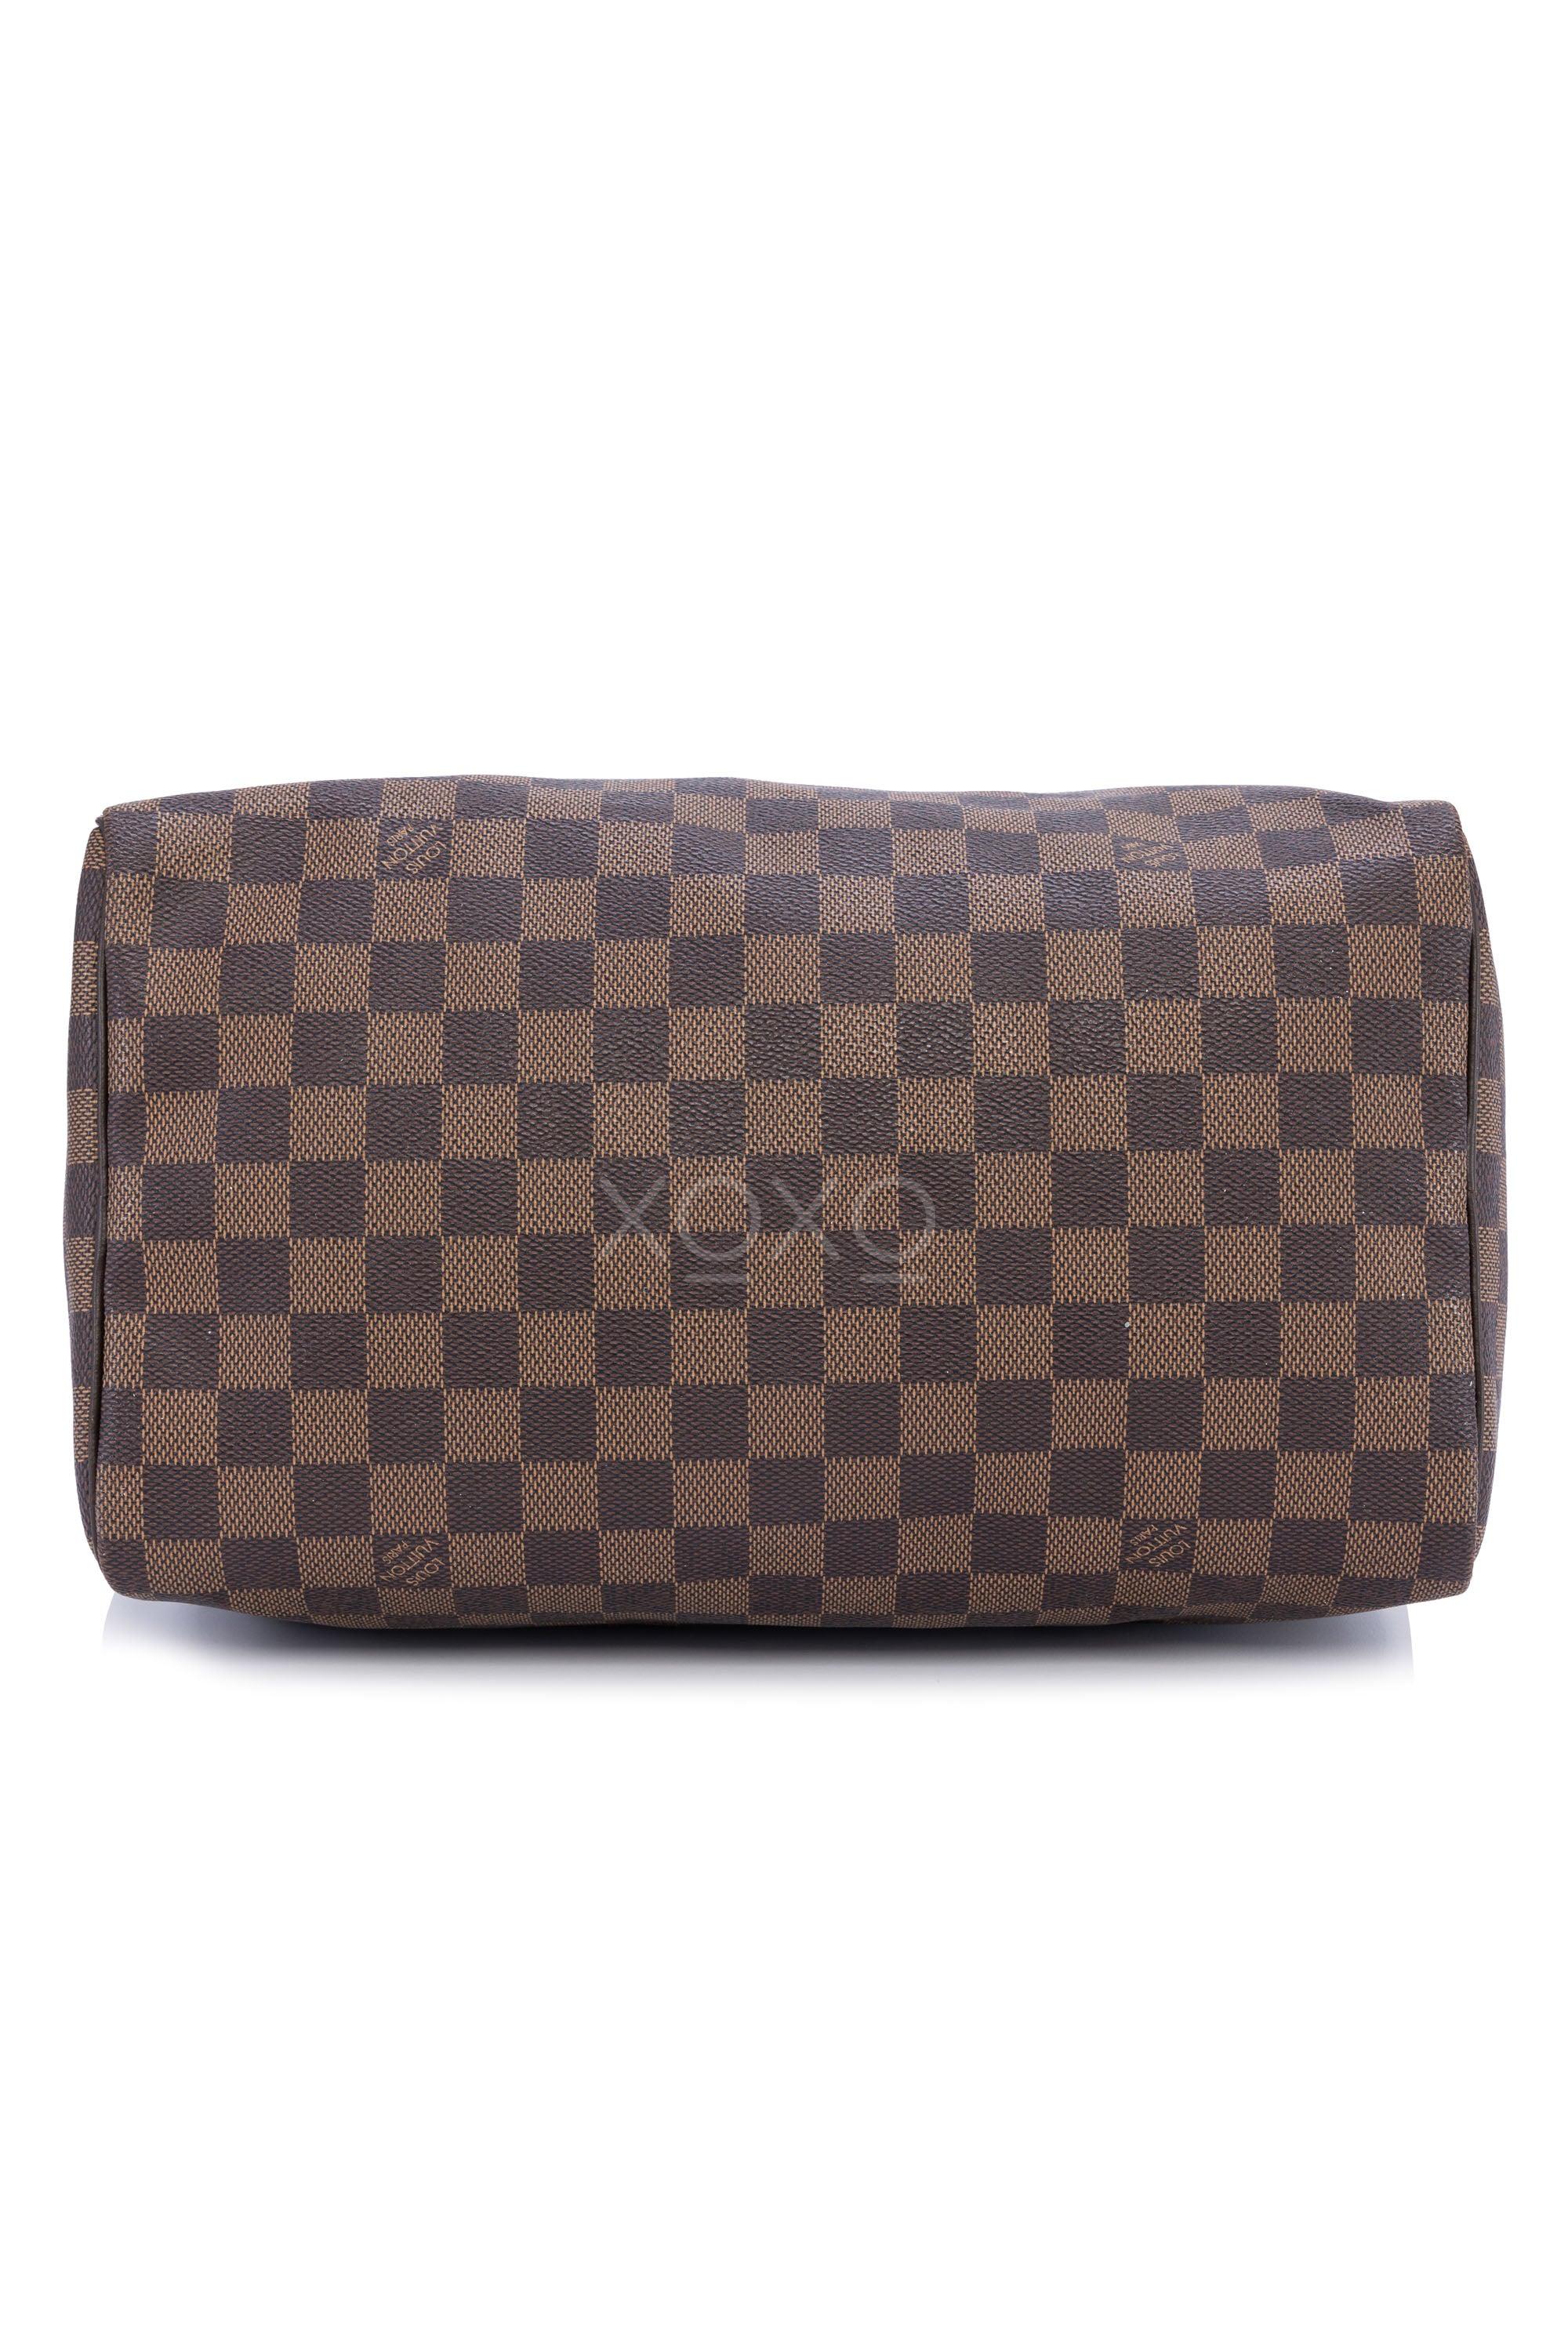 Louis Vuitton Ebene Damier Coated Canvas Speedy 30 Gold Hardware, 2012  Available For Immediate Sale At Sotheby's